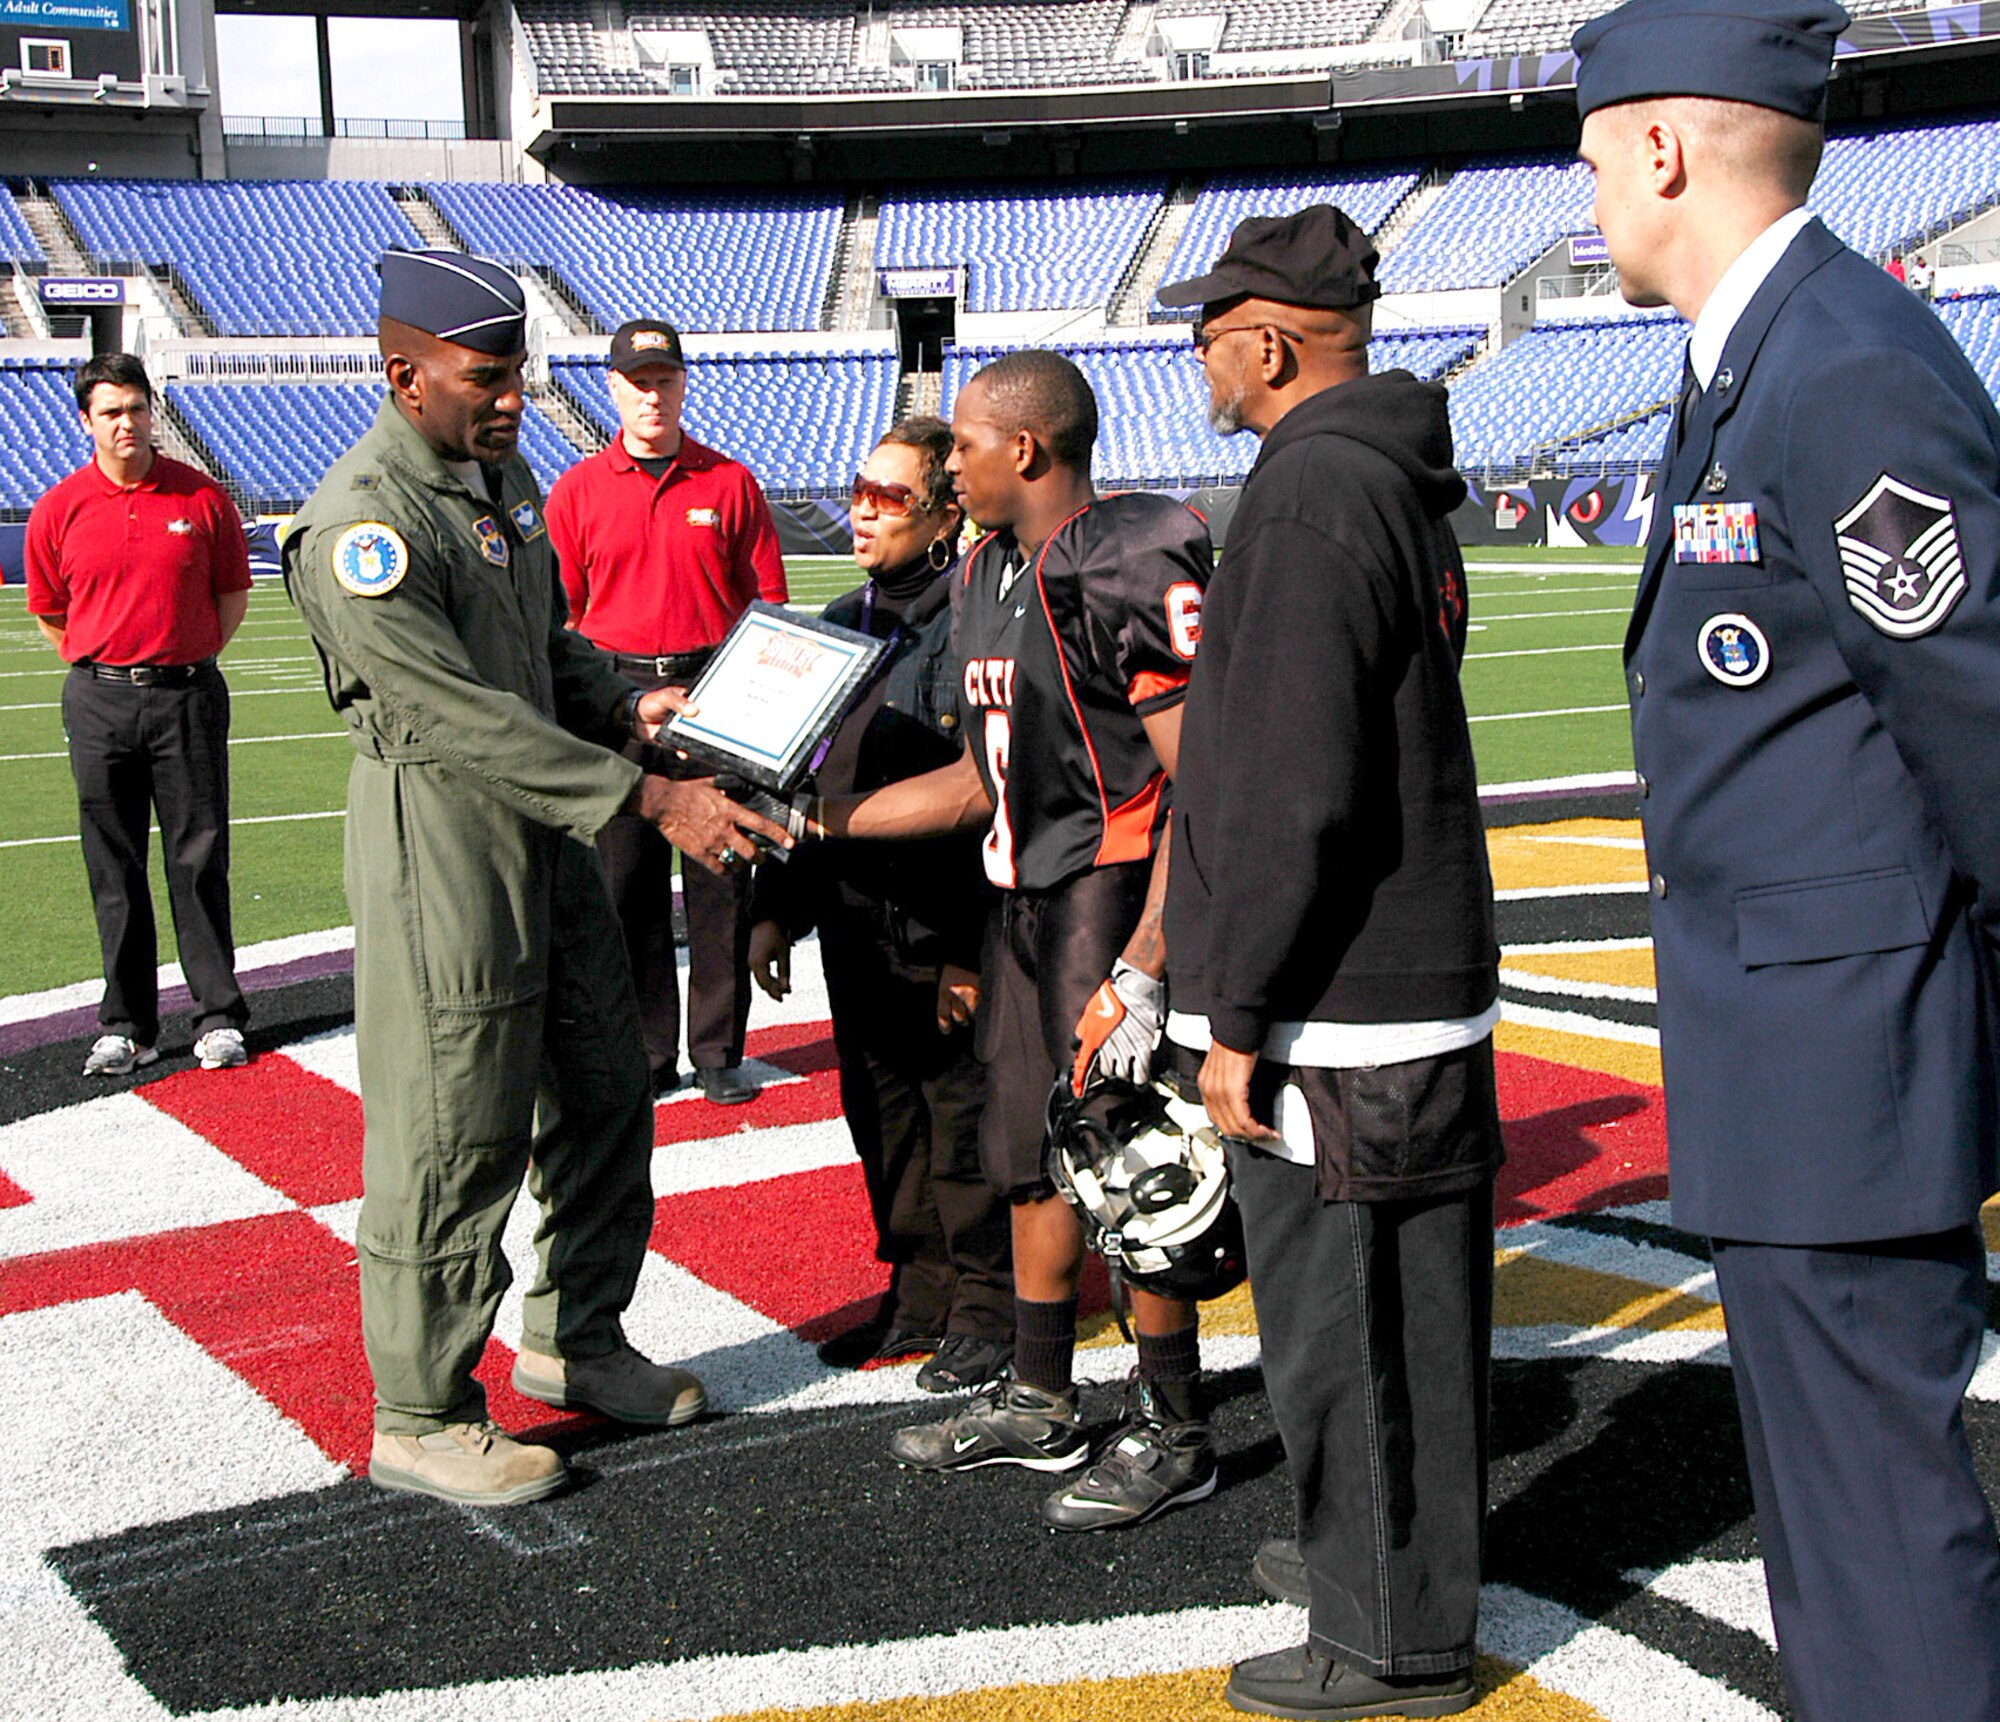 Brig. Gen. Alfred J. Stewart presents Malik Pack of Baltimore City College High School a $500 college scholarship before game time Nov. 8 at M&T Bank Stadium in Baltimore. A Class of 1977 Baltimore Polytechnic Institute High School alumni, General Stewart shared inspirational words with both teams before the game and he presented a $500 college scholarship to a member of both high schools. General Stewart is the Air Force Recruiting Service commander. (U.S. Air Force photo/Tech. Sgt. Jennifer Lindsey) 
